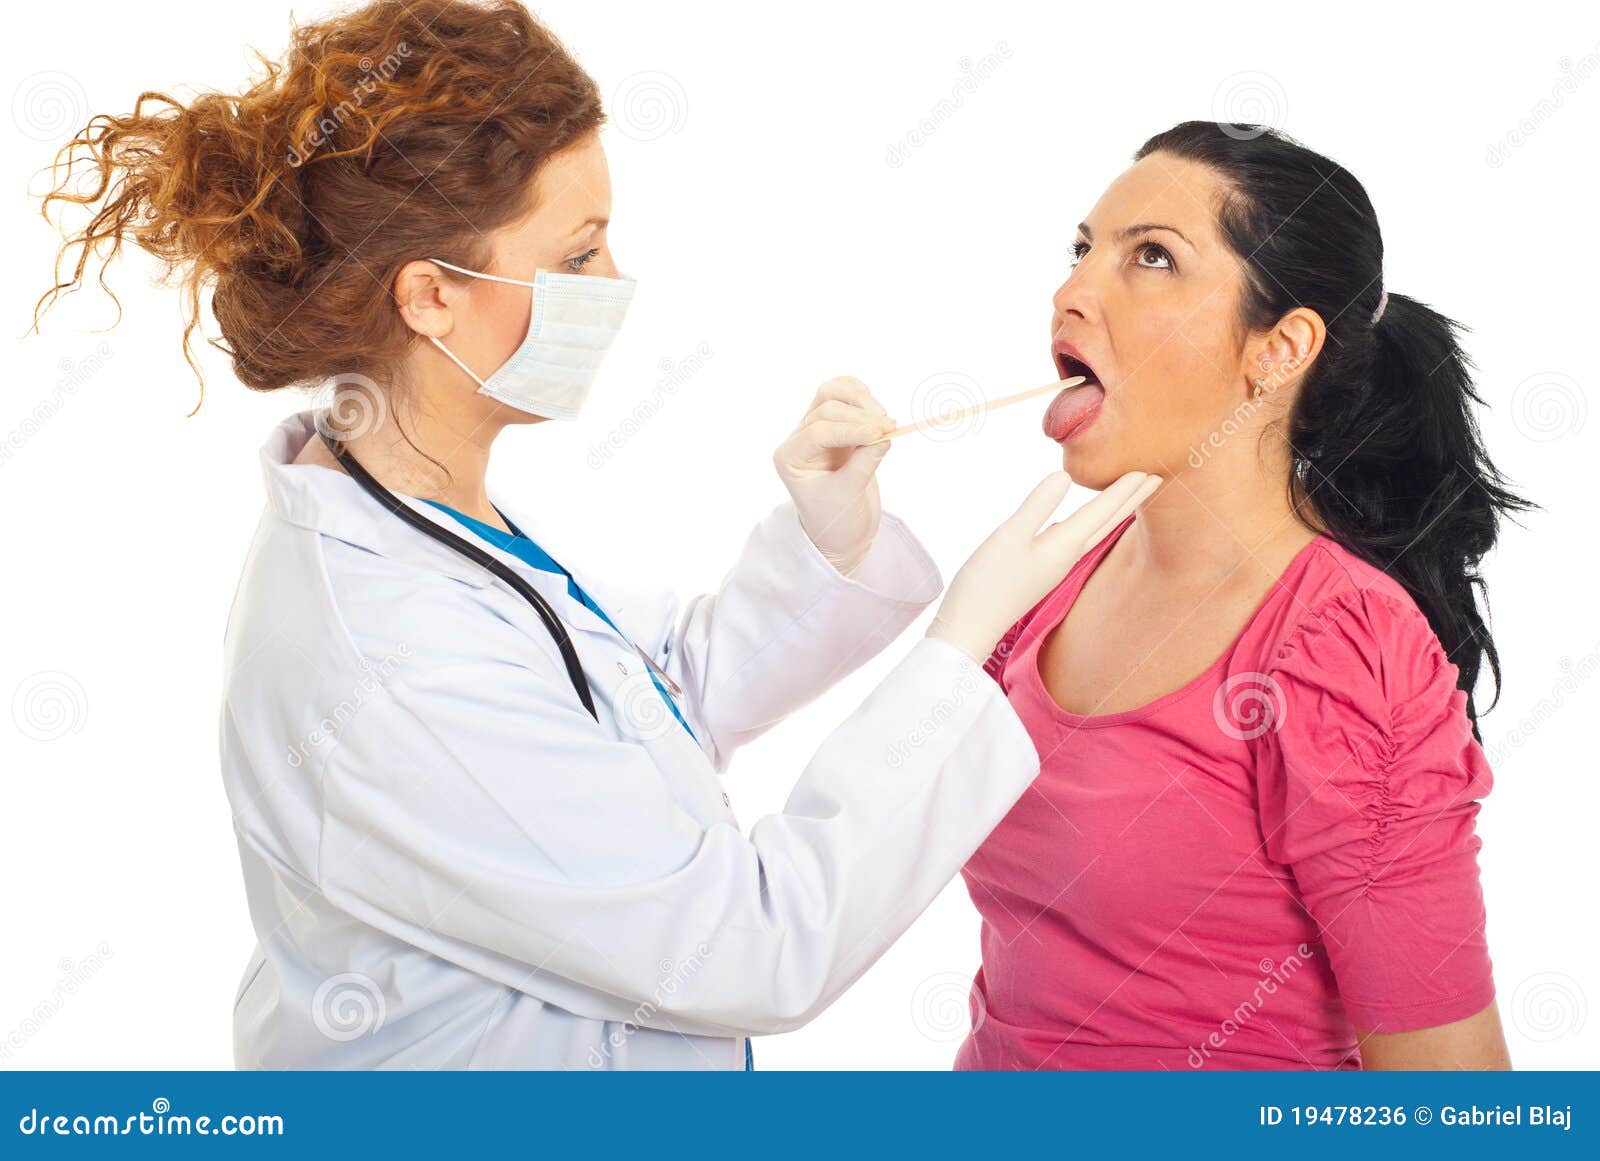 doctor checking for sore throat